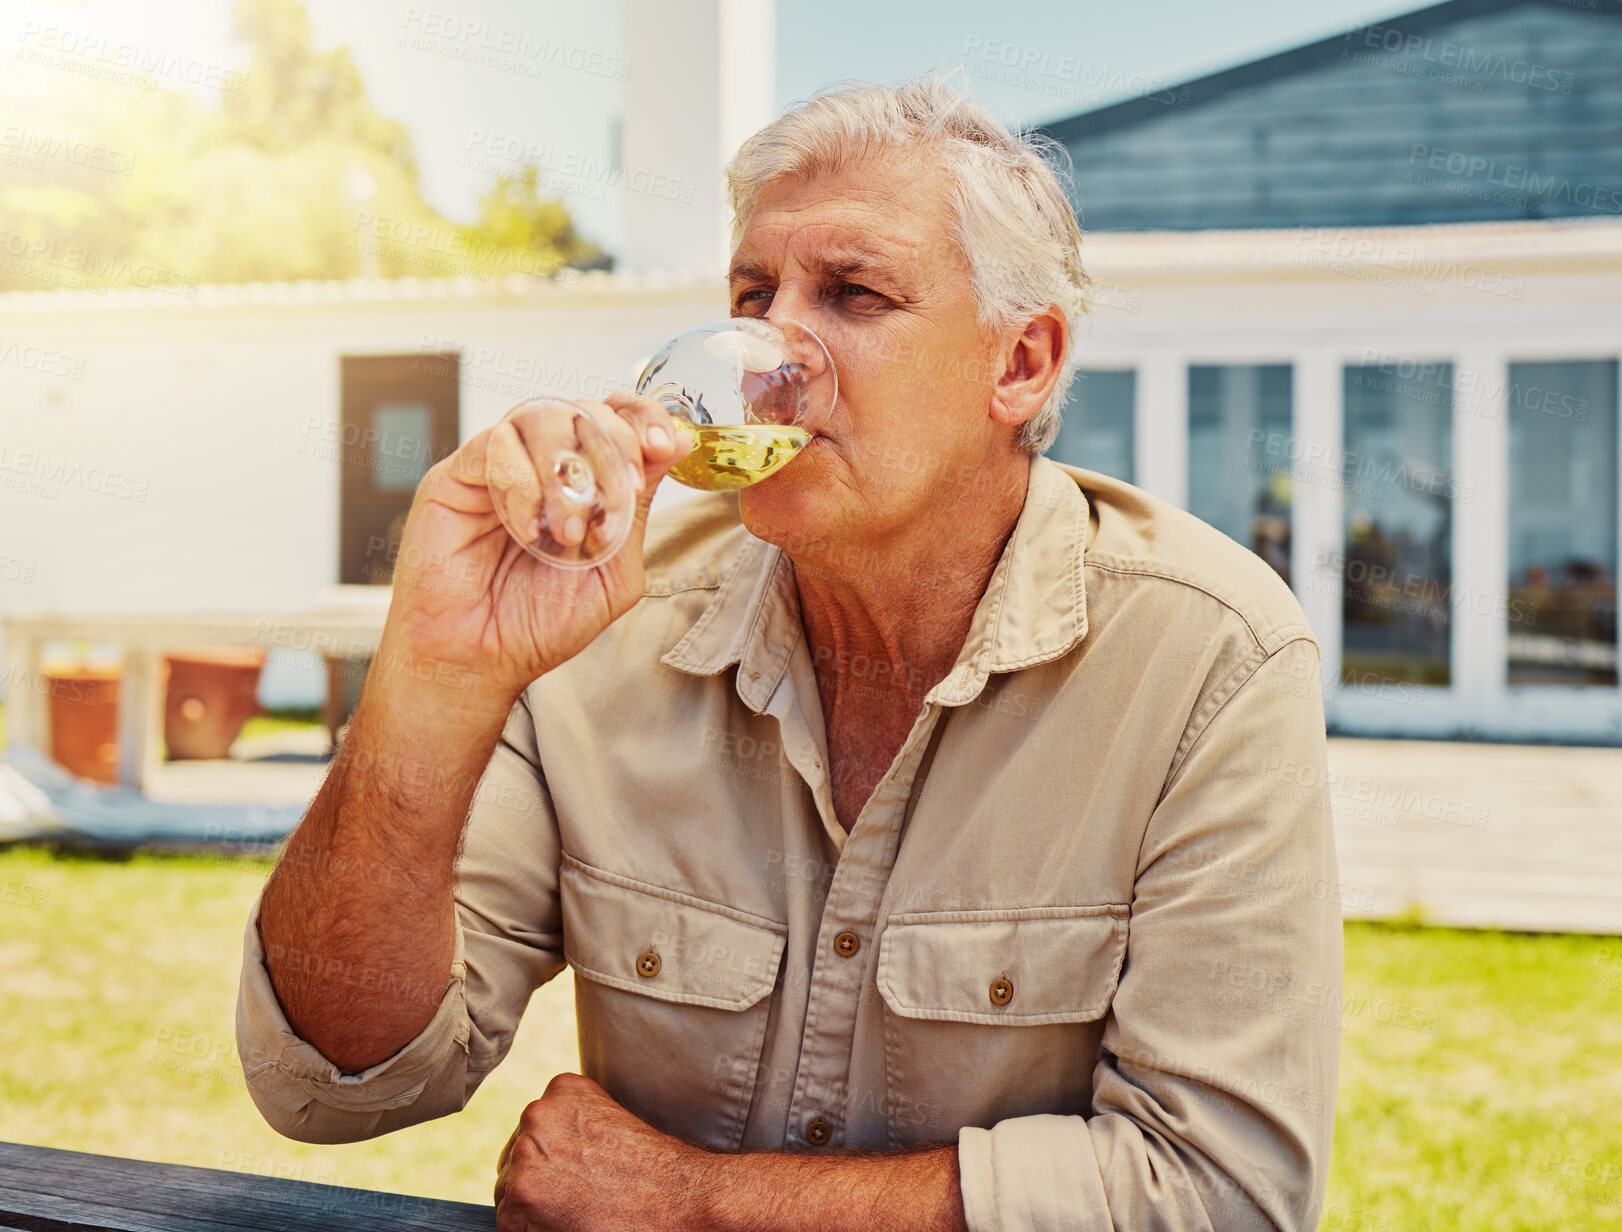 Buy stock photo One senior caucasian man sitting alone and drinking glass of white wine during wine tasting on a vineyard. Elderly caucasian man holding and enjoying alcohol from a wineglass on farm during a weekend